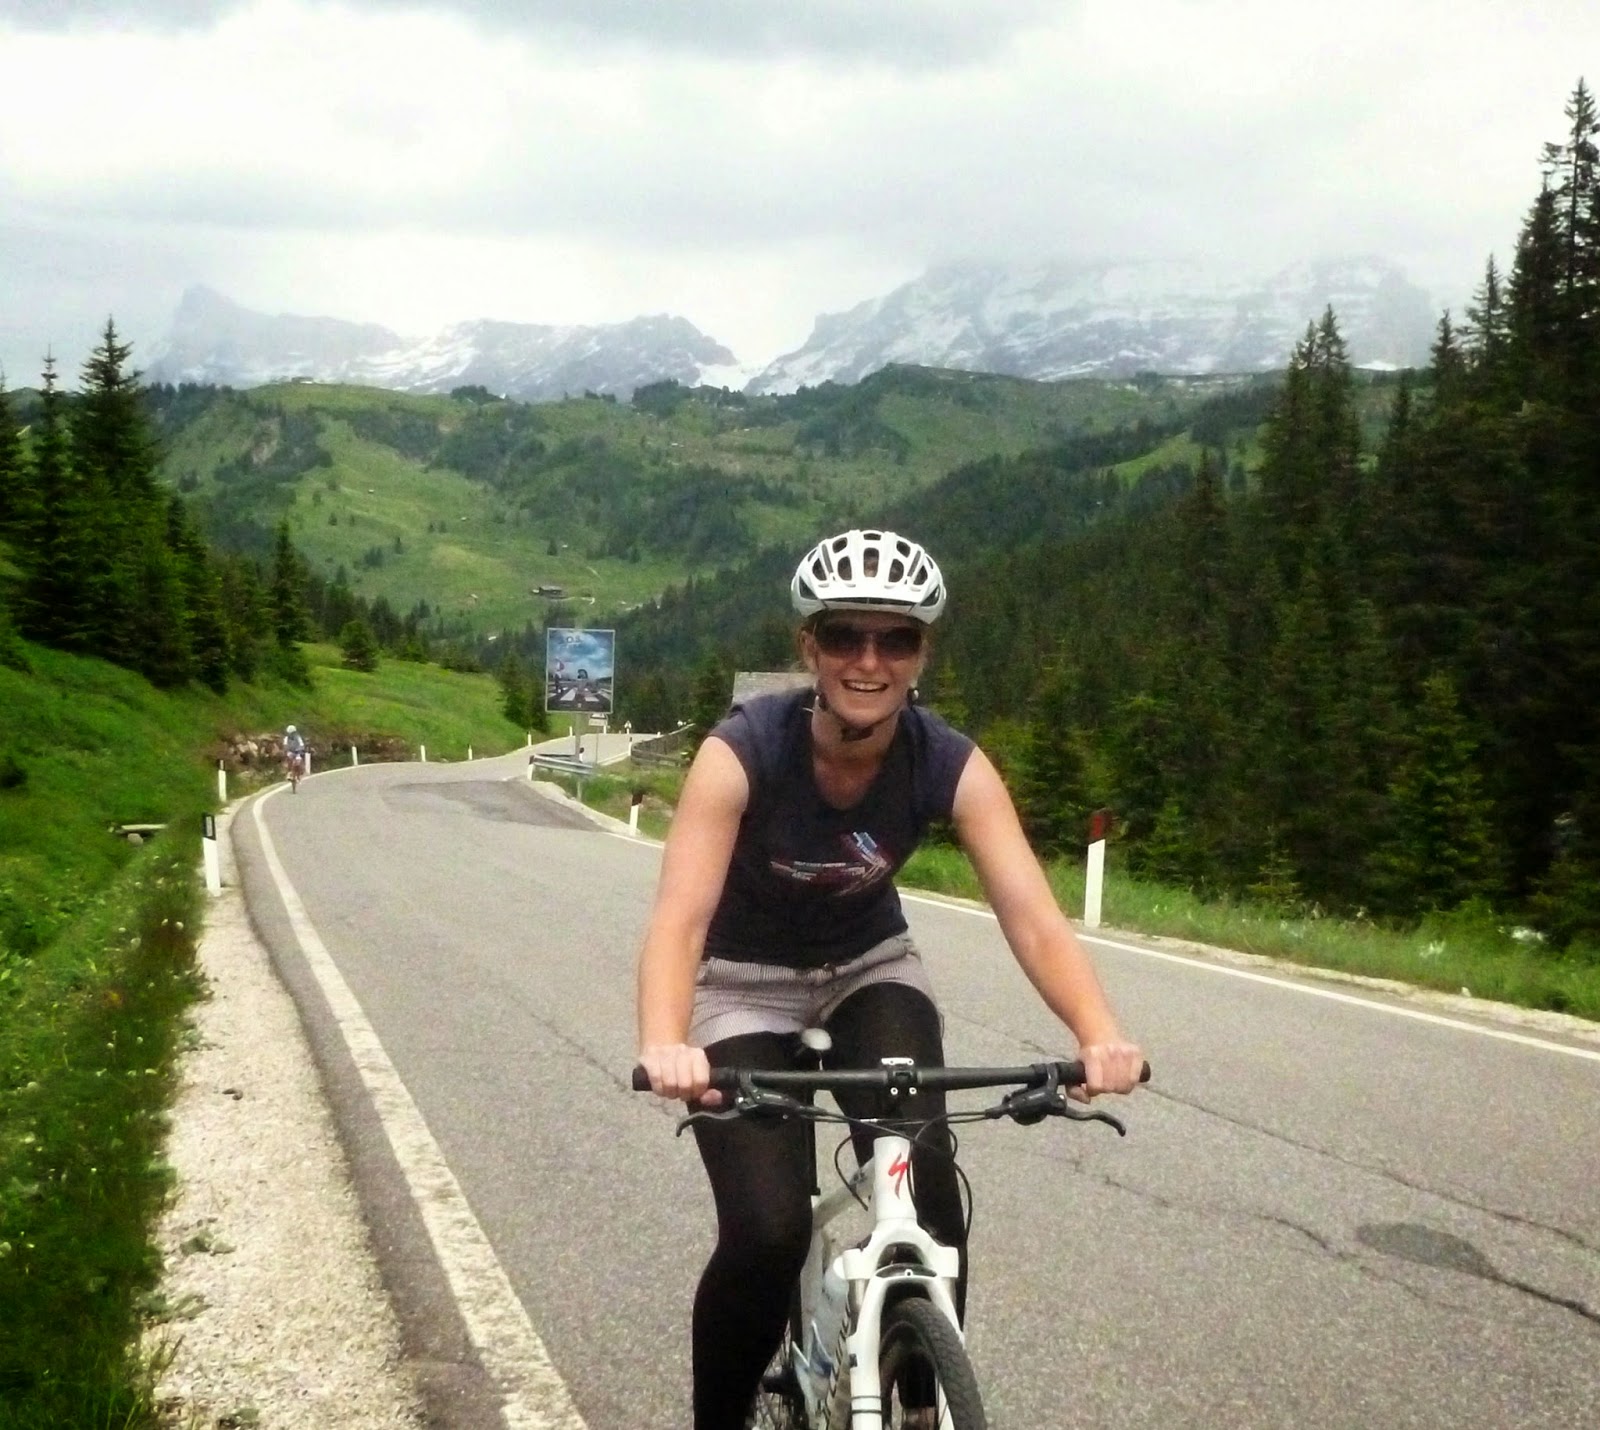 Solo Female Cycling Around the World: WOW (Women On Wheels)